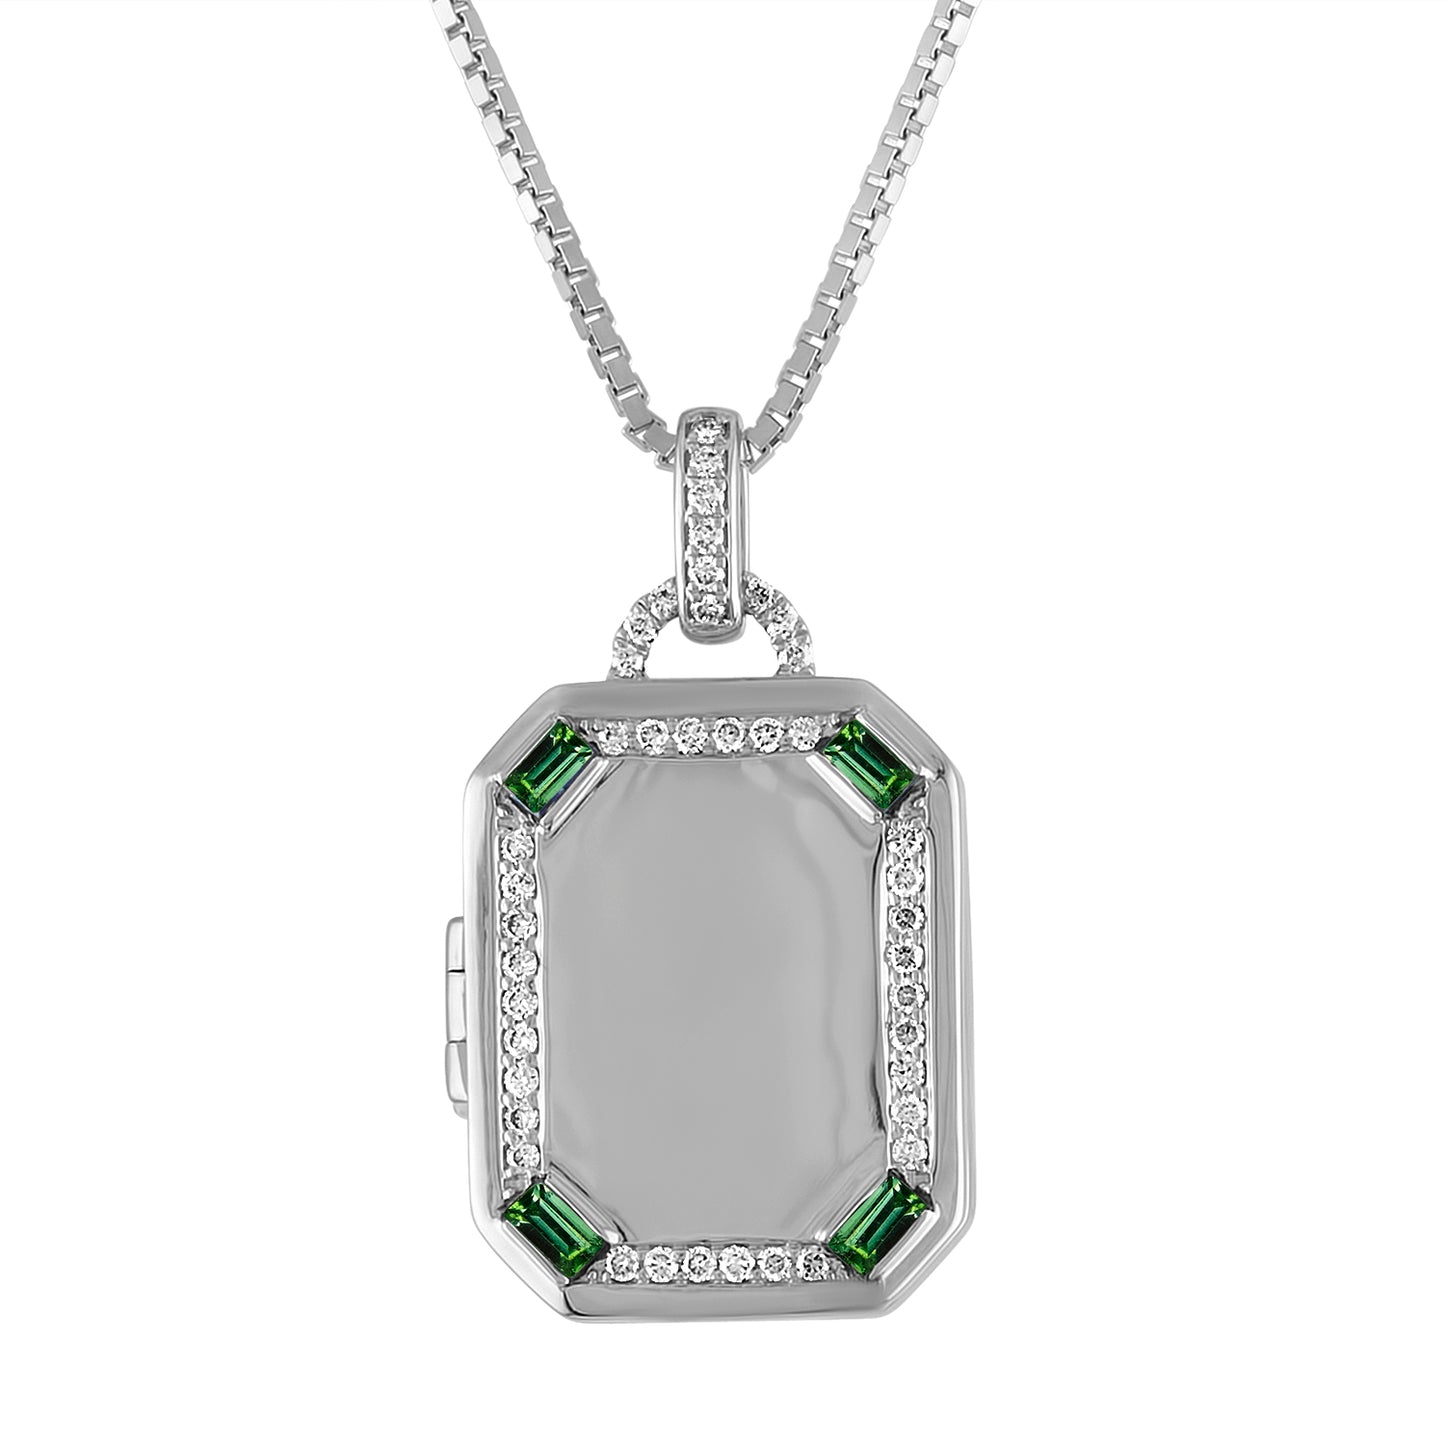 White gold rectangle locket with emerald baguettes and round diamonds.